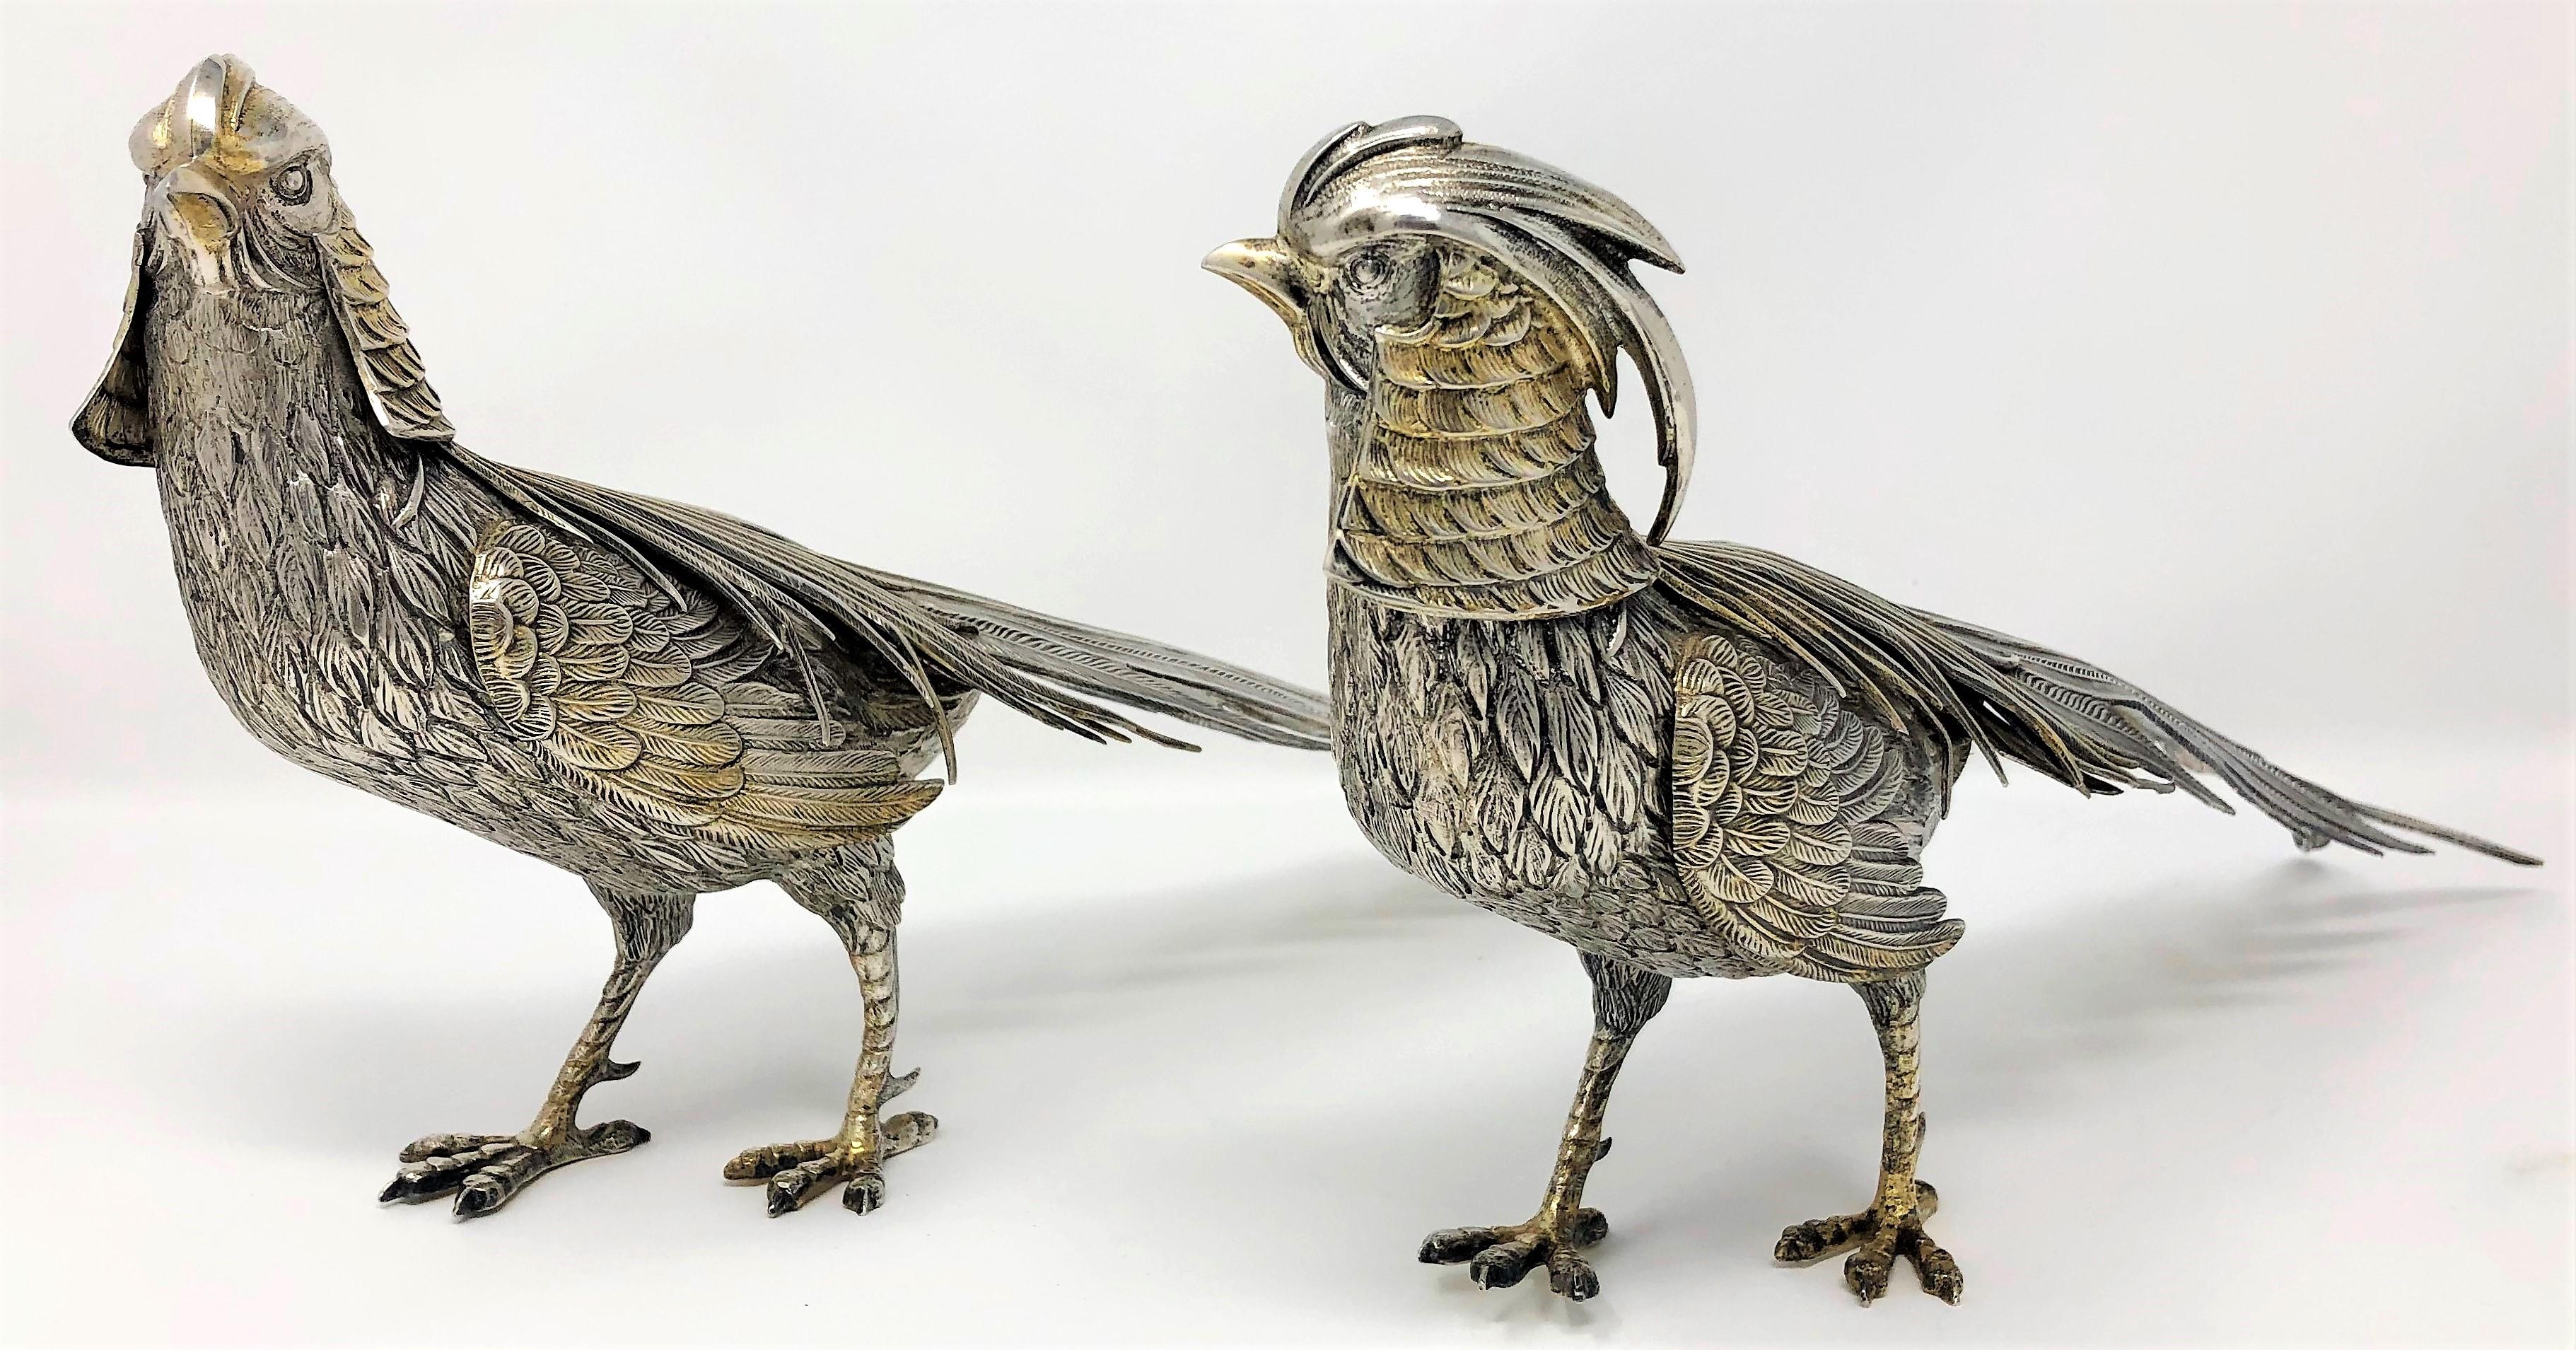 Pair of antique sterling silver Chinese golden pheasants, circa 1920-1930.